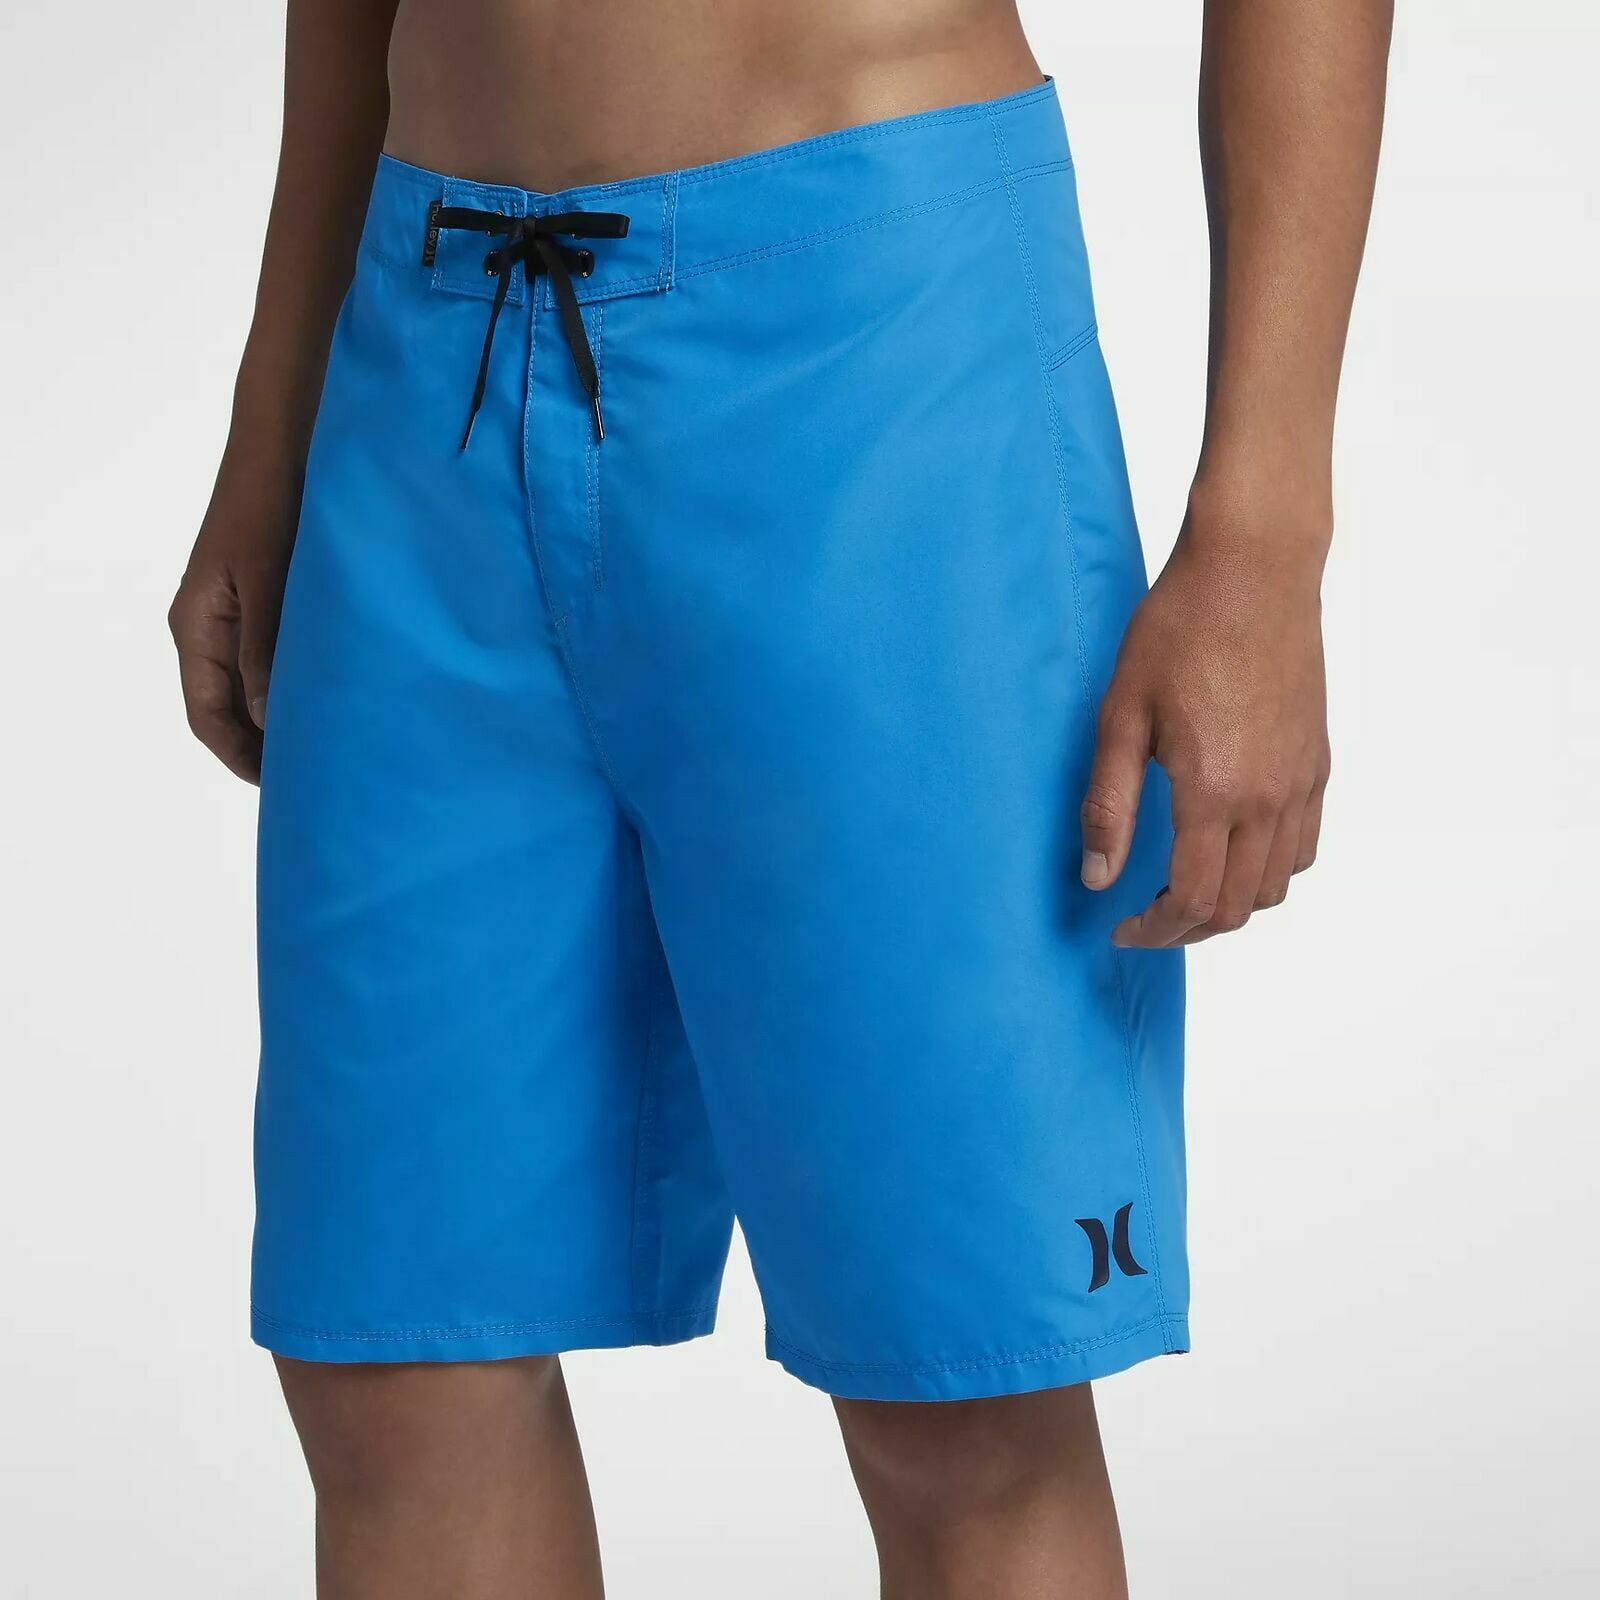 Hurley Men's Phantom One and Only 21" Boardshorts